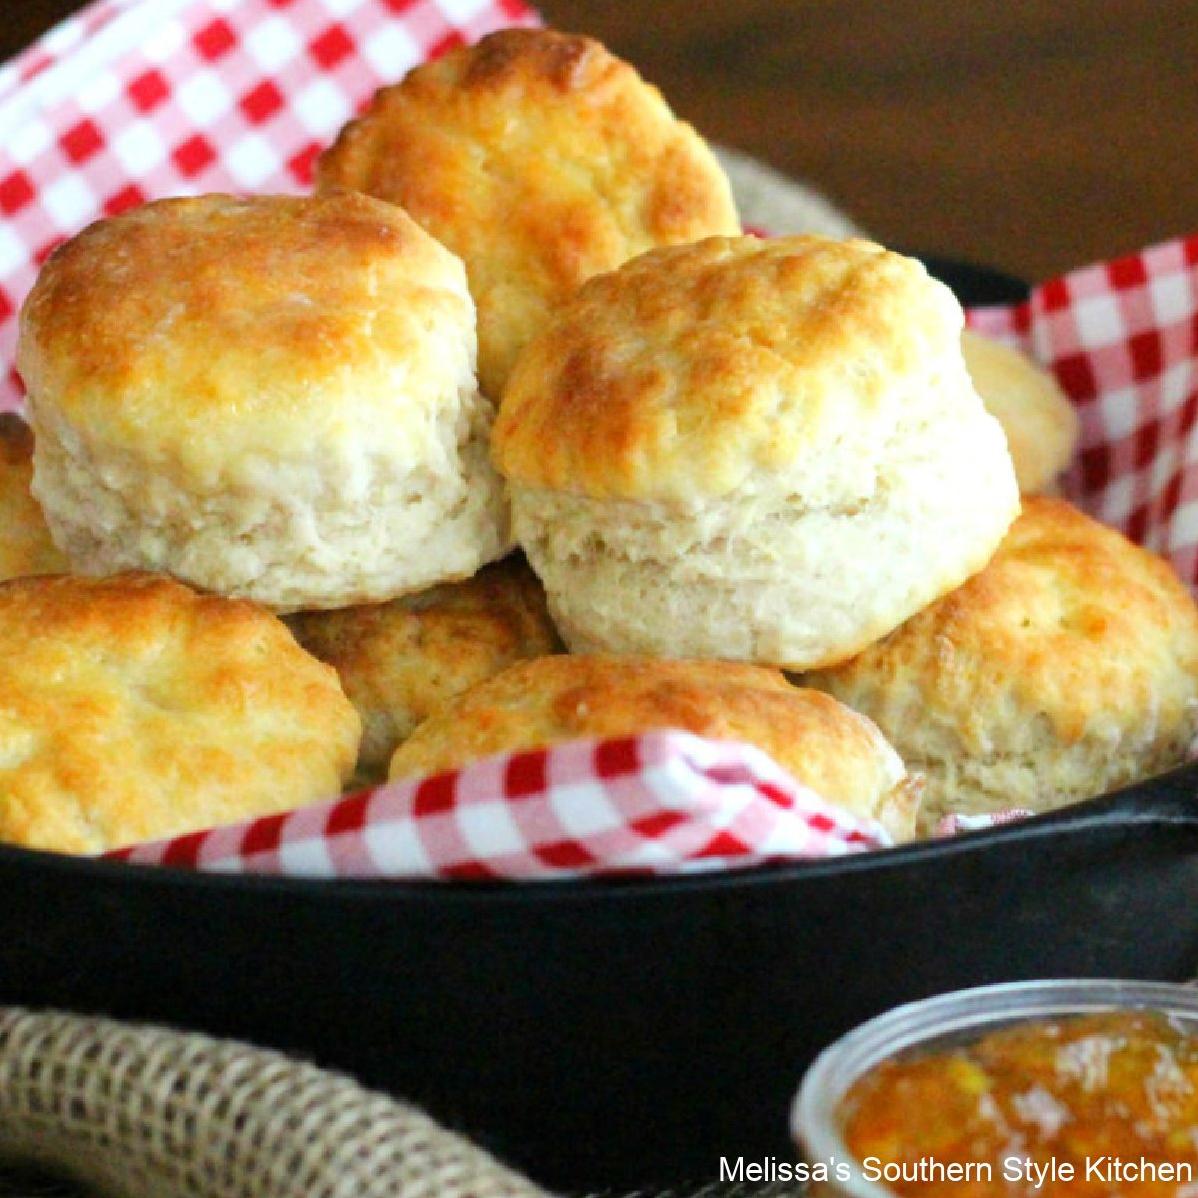  The perfect southern breakfast biscuits that will always leave you wanting more!